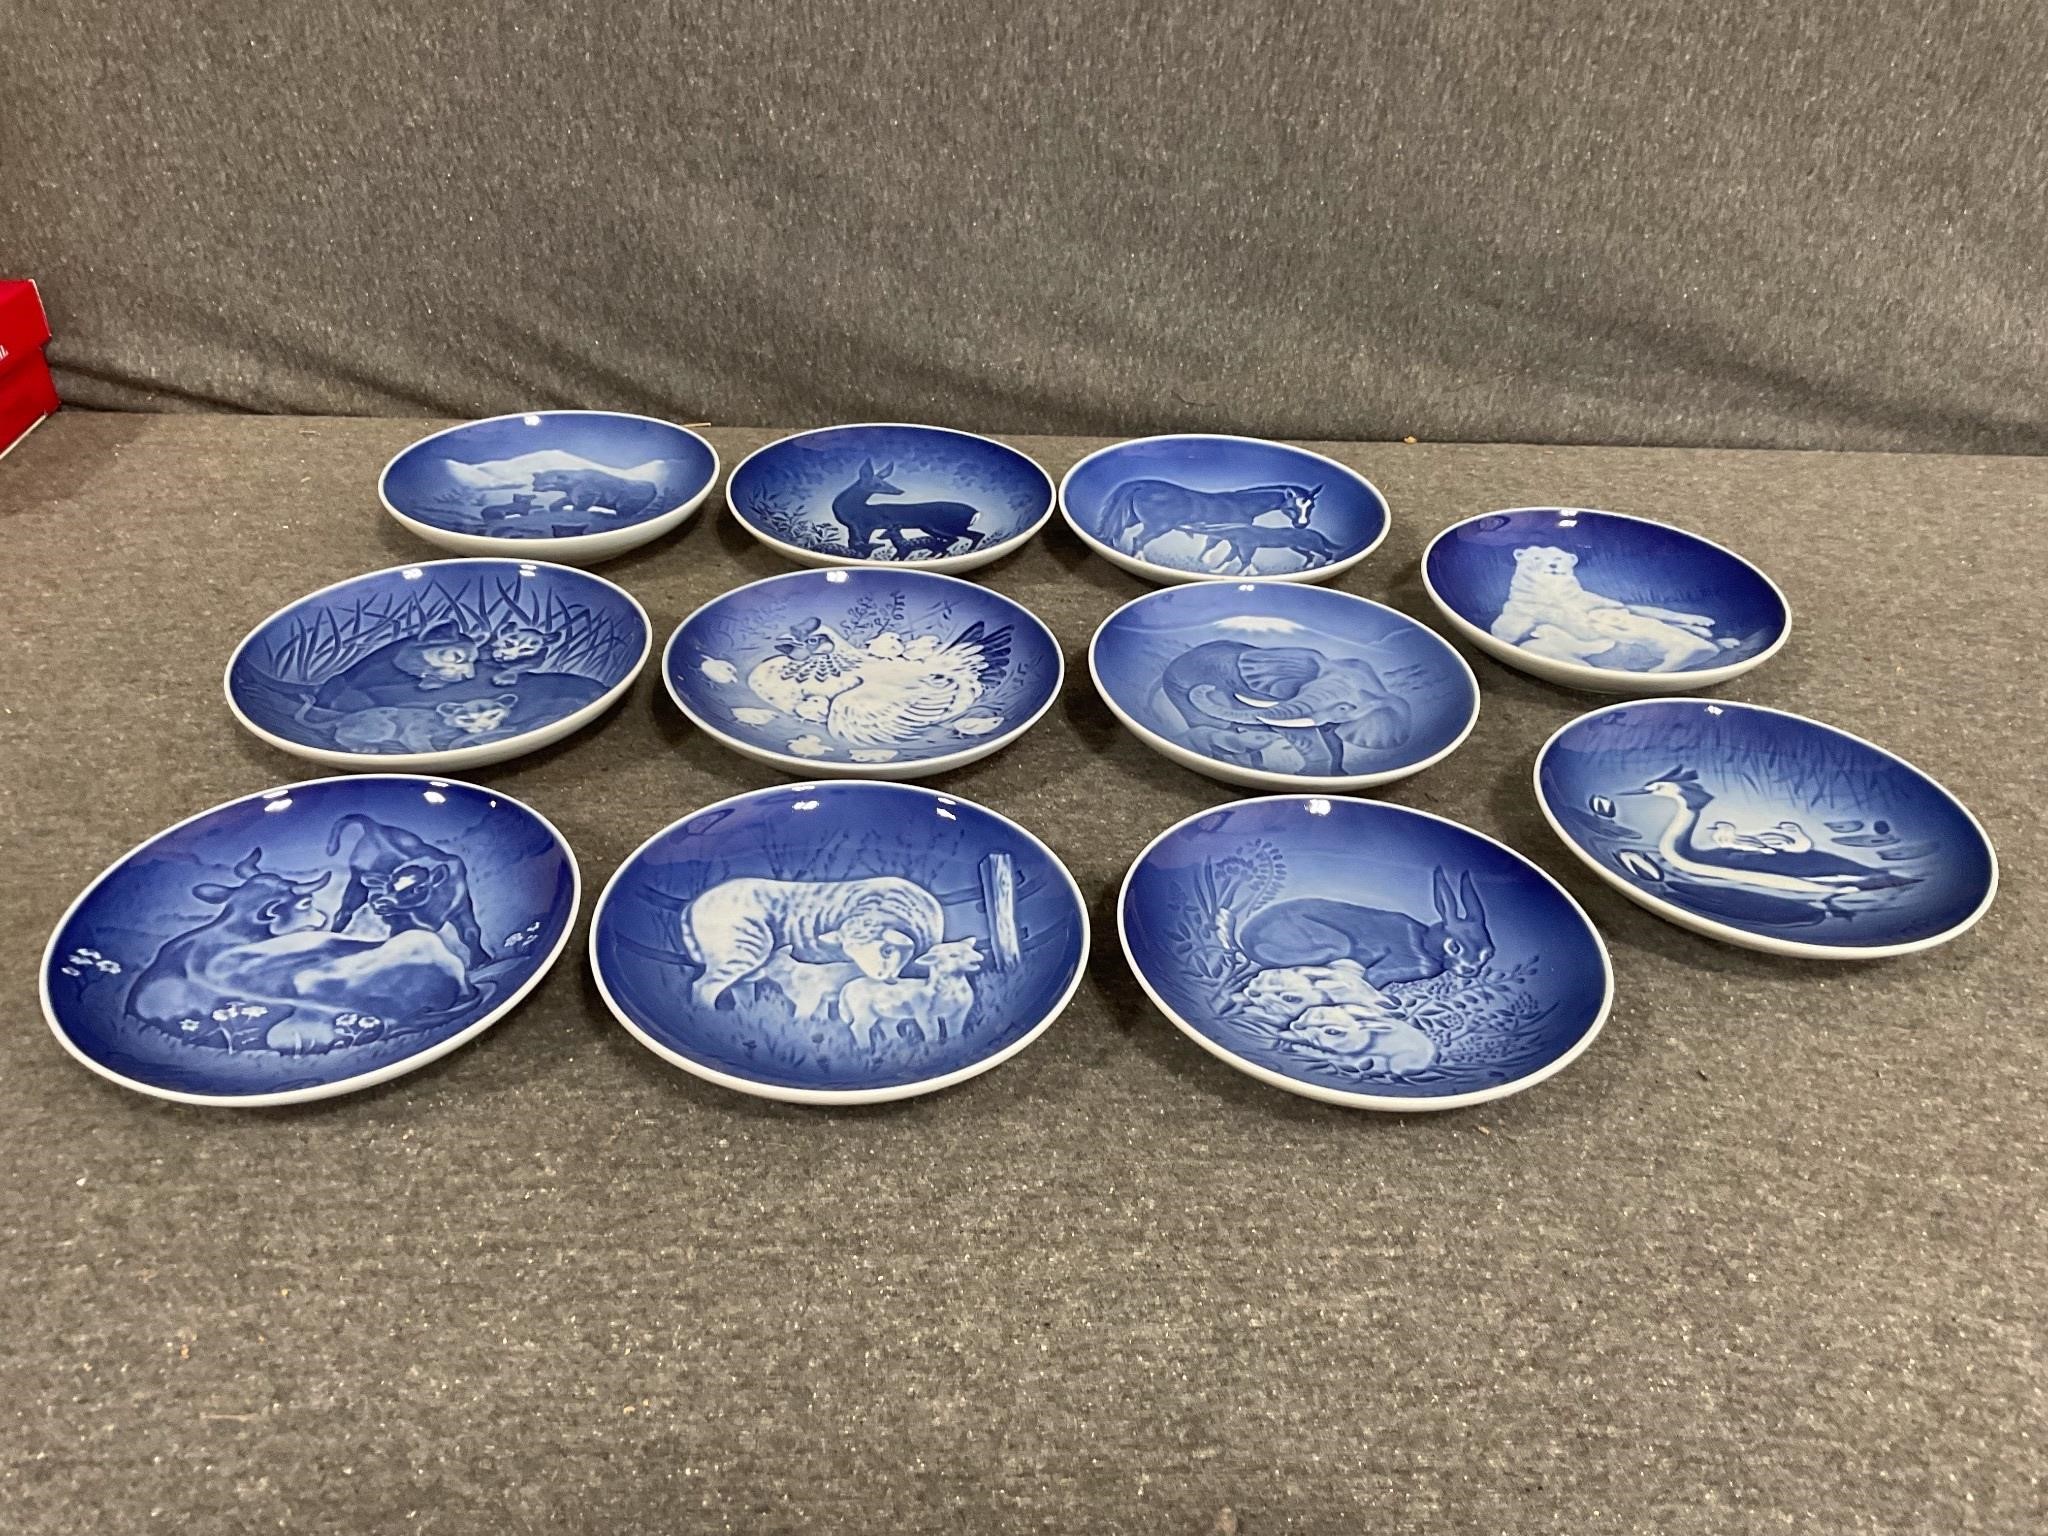 Bing & Grondahl Mother's Day Plates